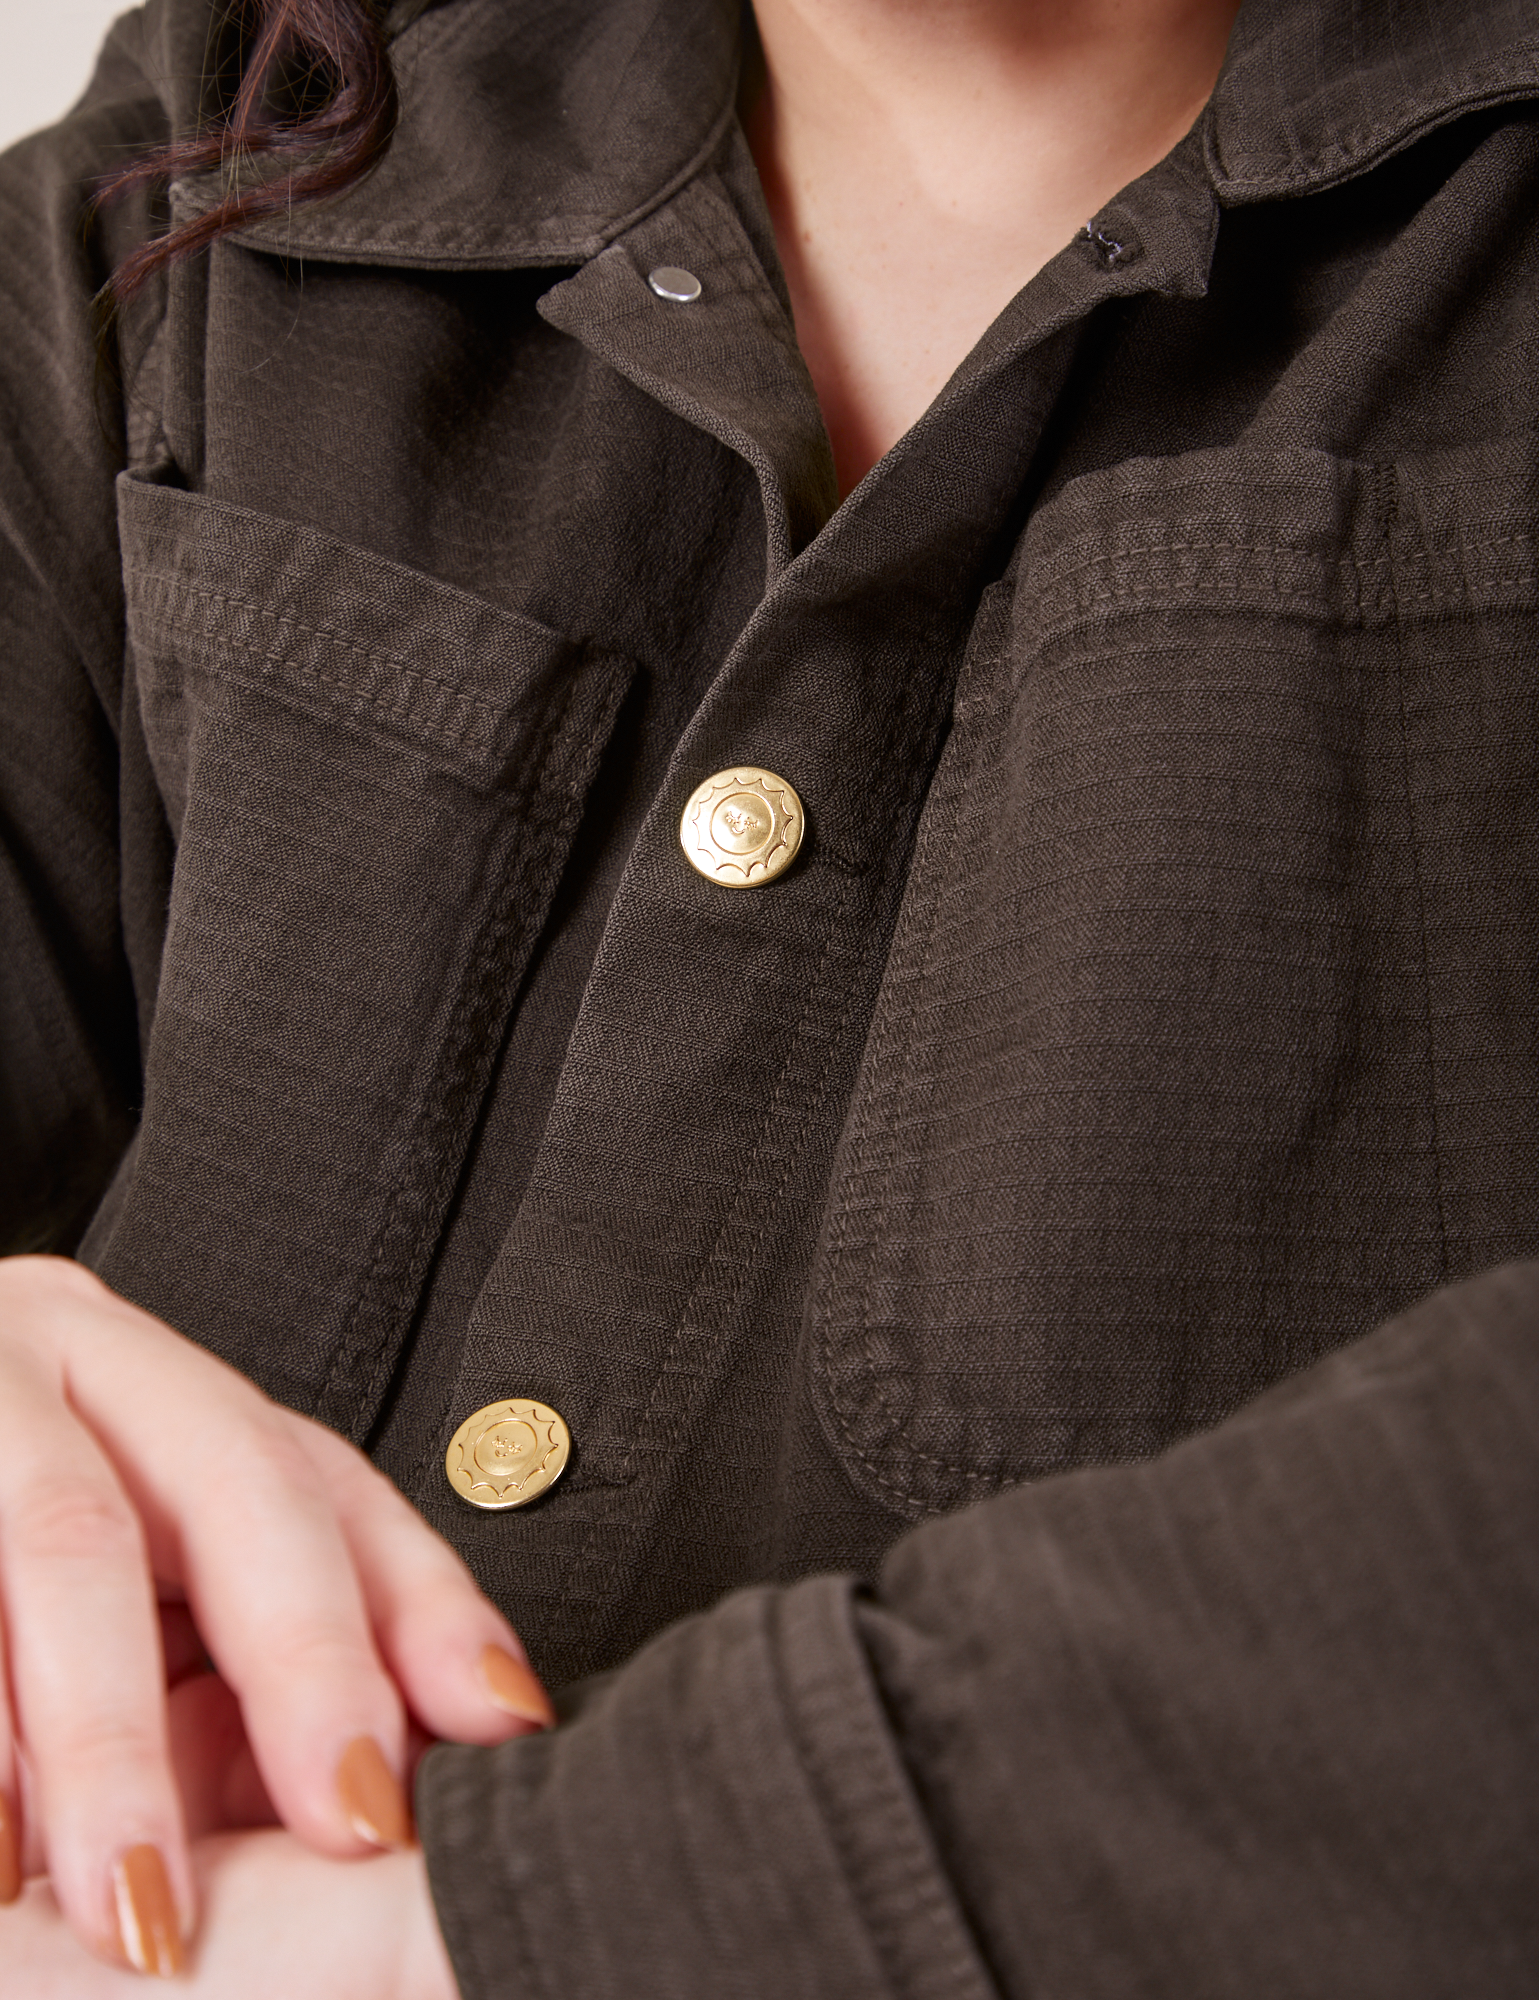 Field Coat in Espresso Brown front close up on Morgan